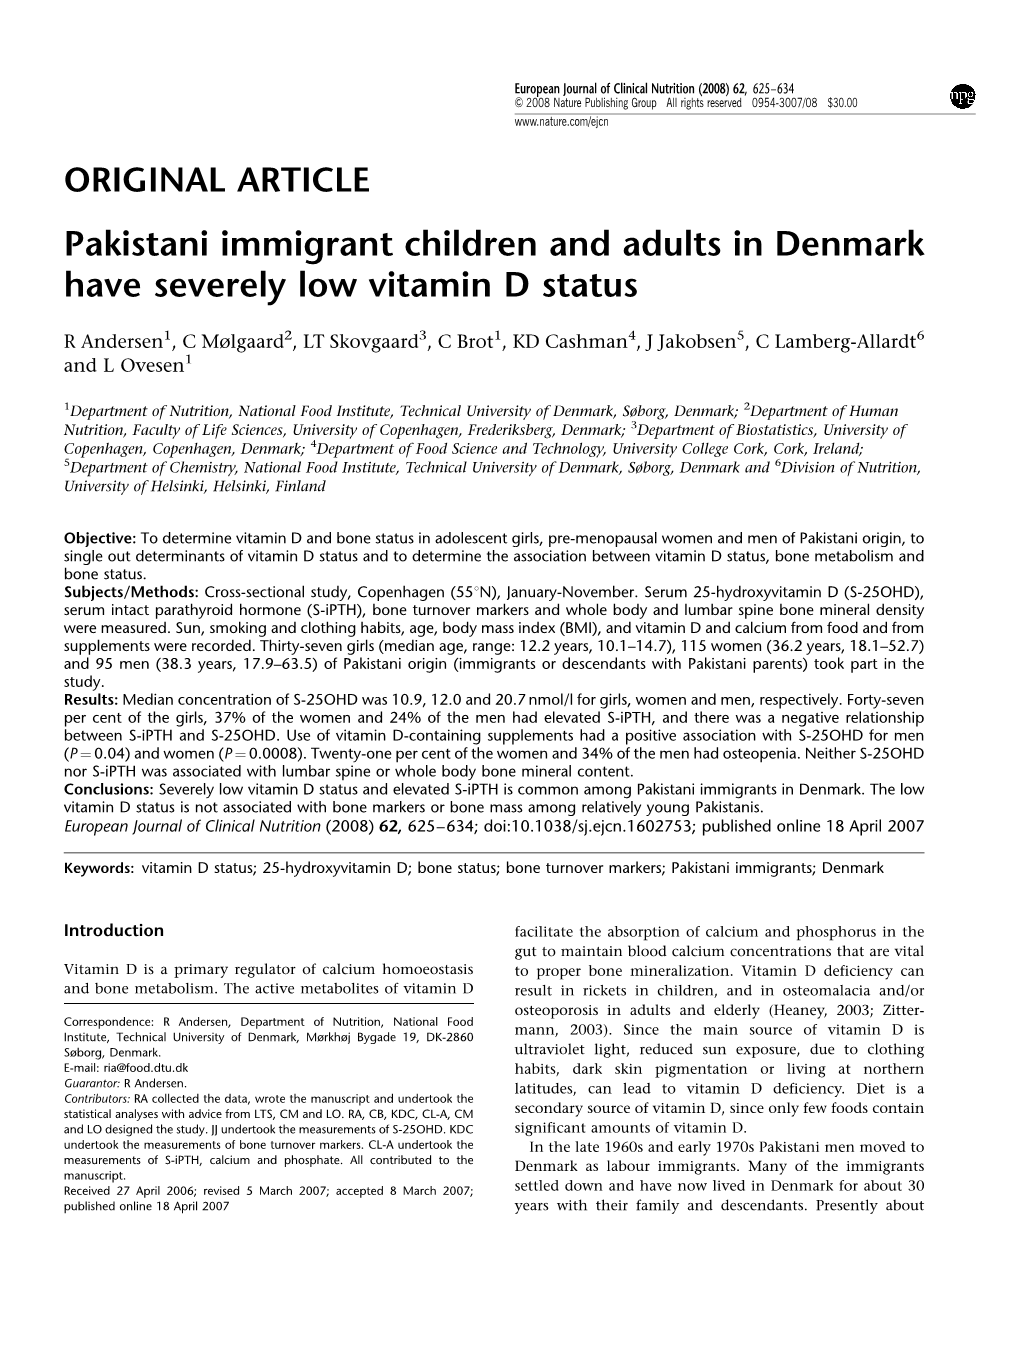 Pakistani Immigrant Children and Adults in Denmark Have Severely Low Vitamin D Status